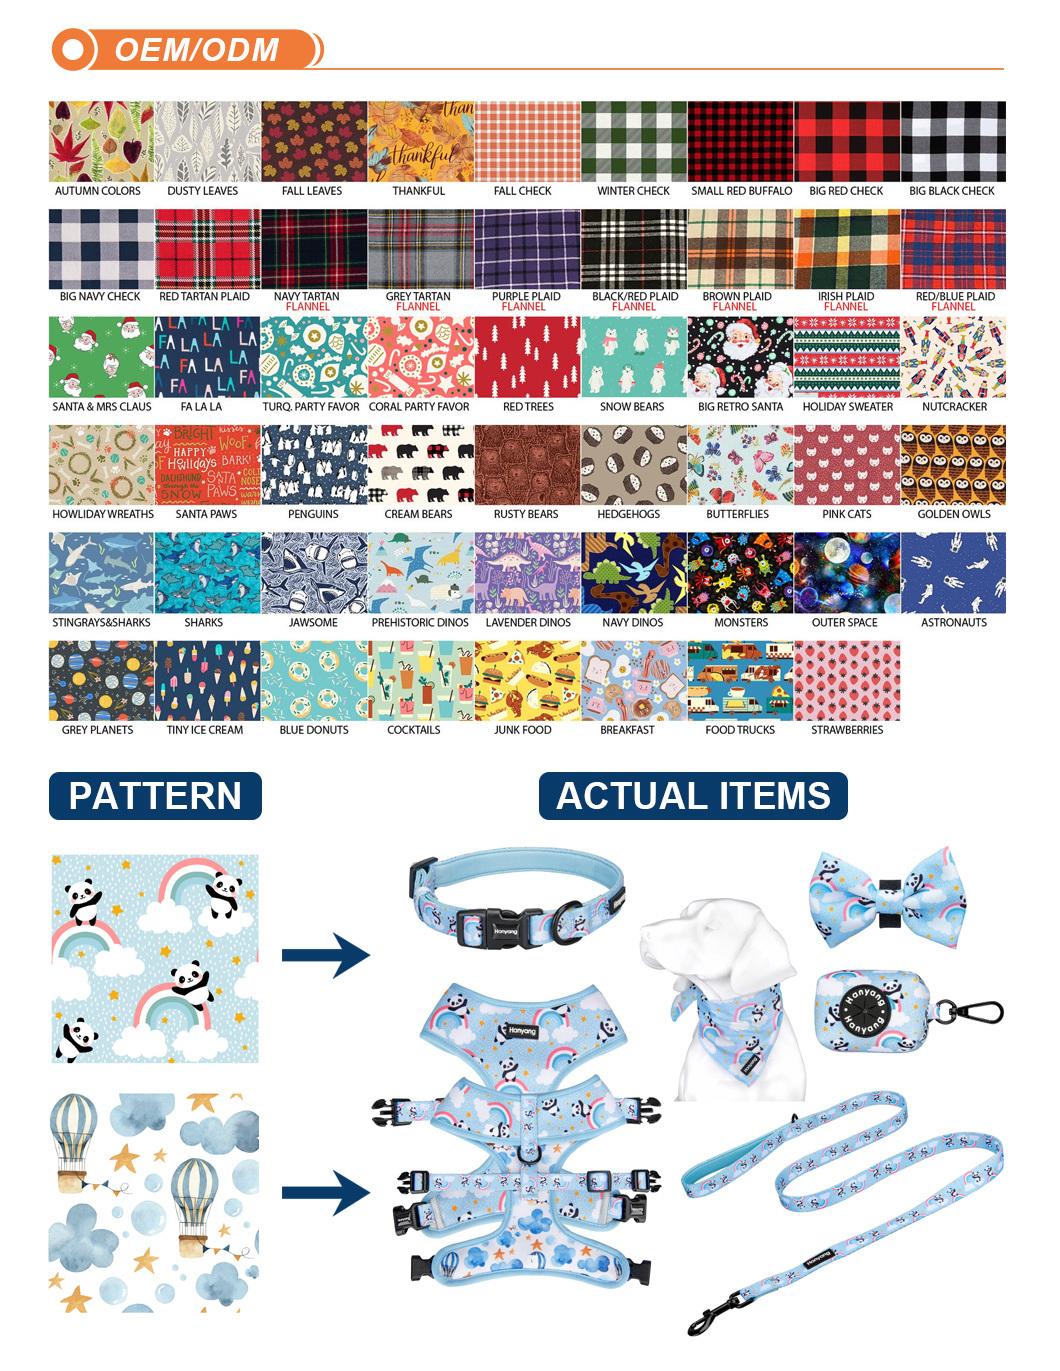 Free Design Pet Harness Sublimation Pet Harnesses Dog Harness Set Luxury with Bowtie